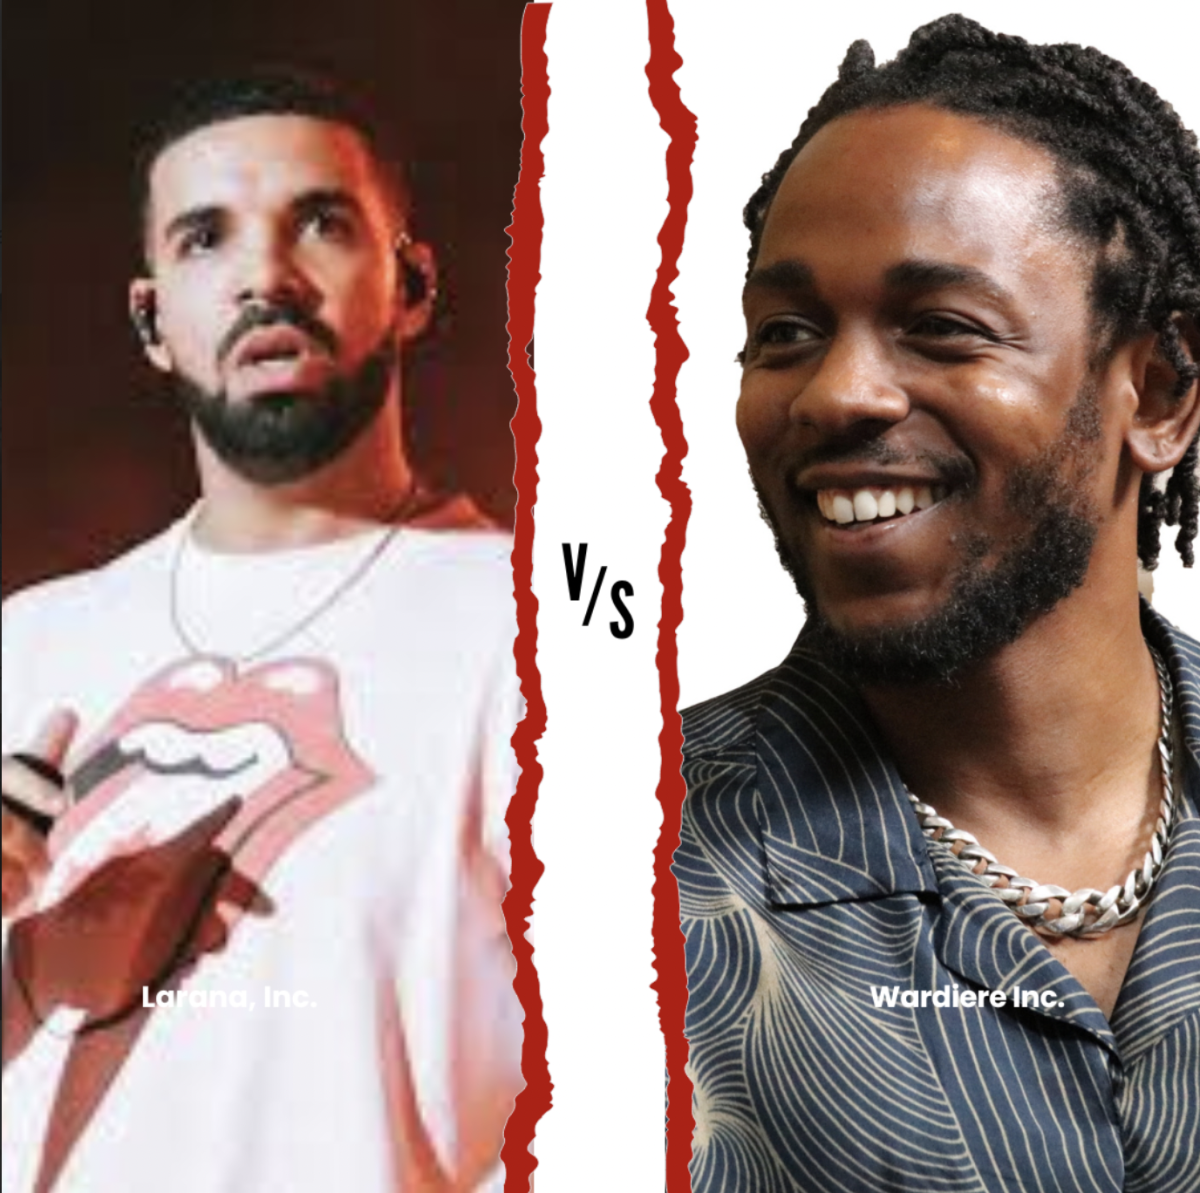 Drake and Kendrick Lamar shred out their beef through heated rap diss songs.